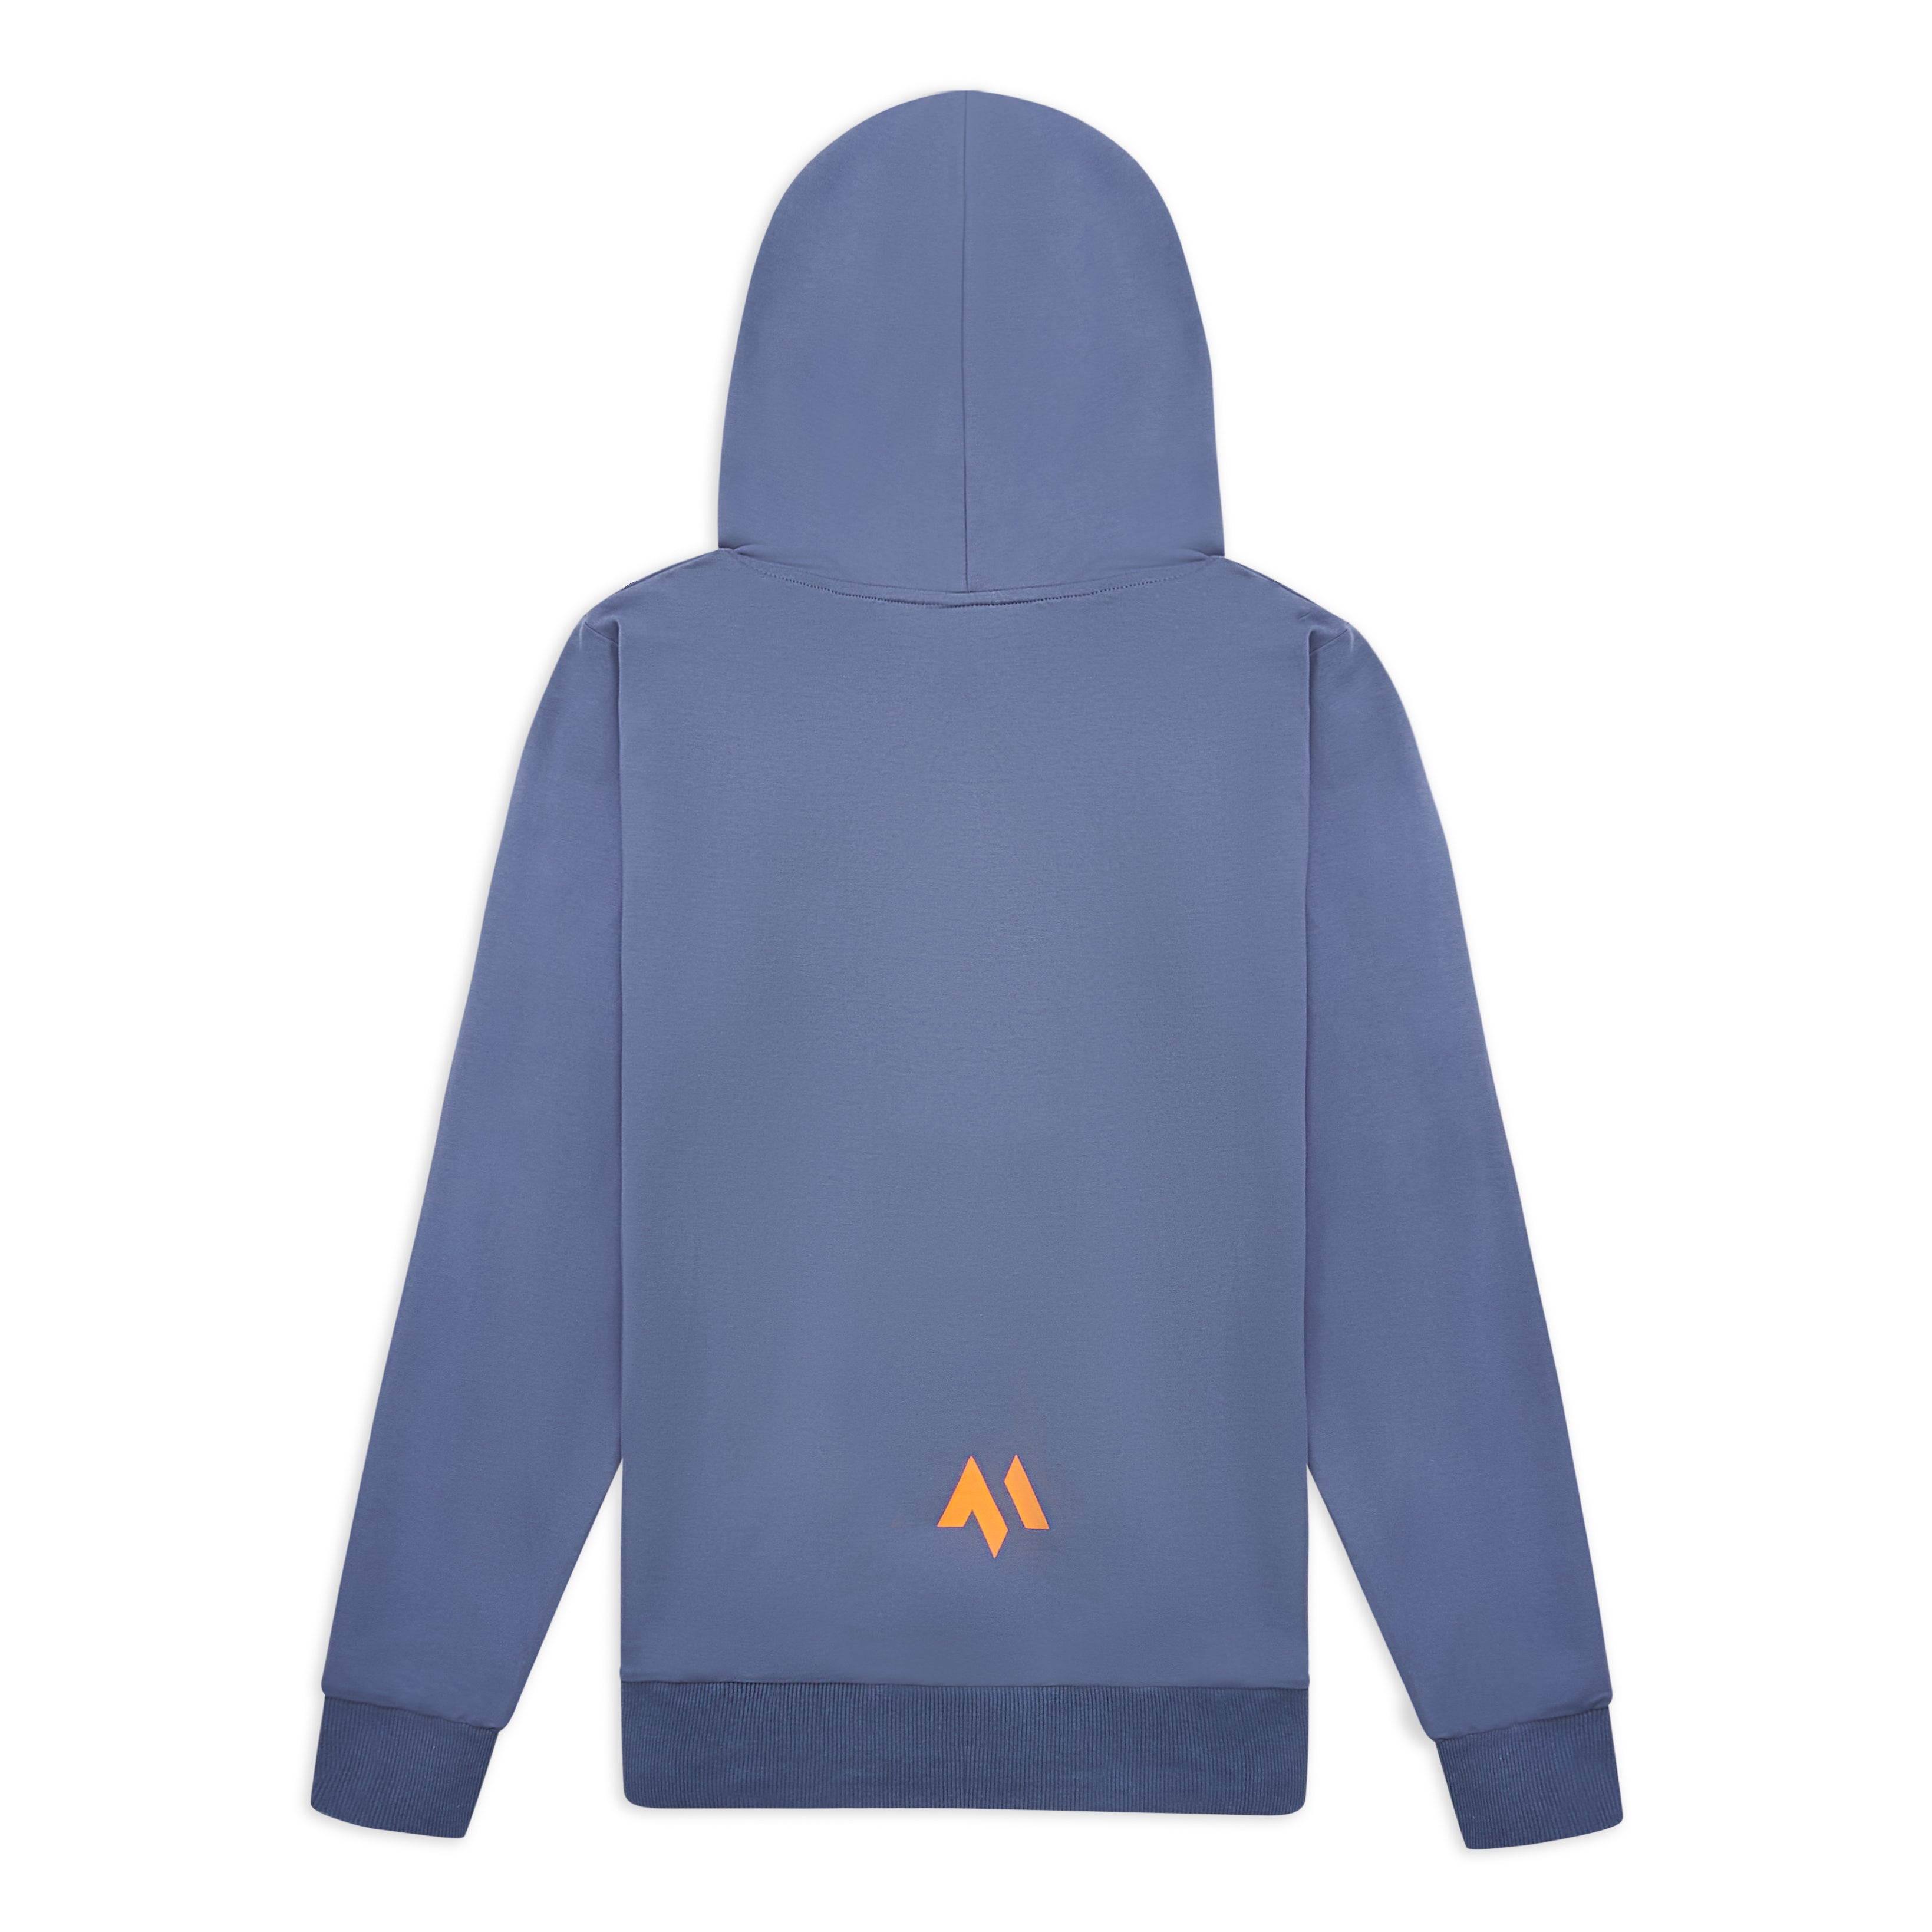 This is the back of the new standard hoodie in blue steel. It's a large shot of the product on a white background and features the M logo in orange at the bottom of the back